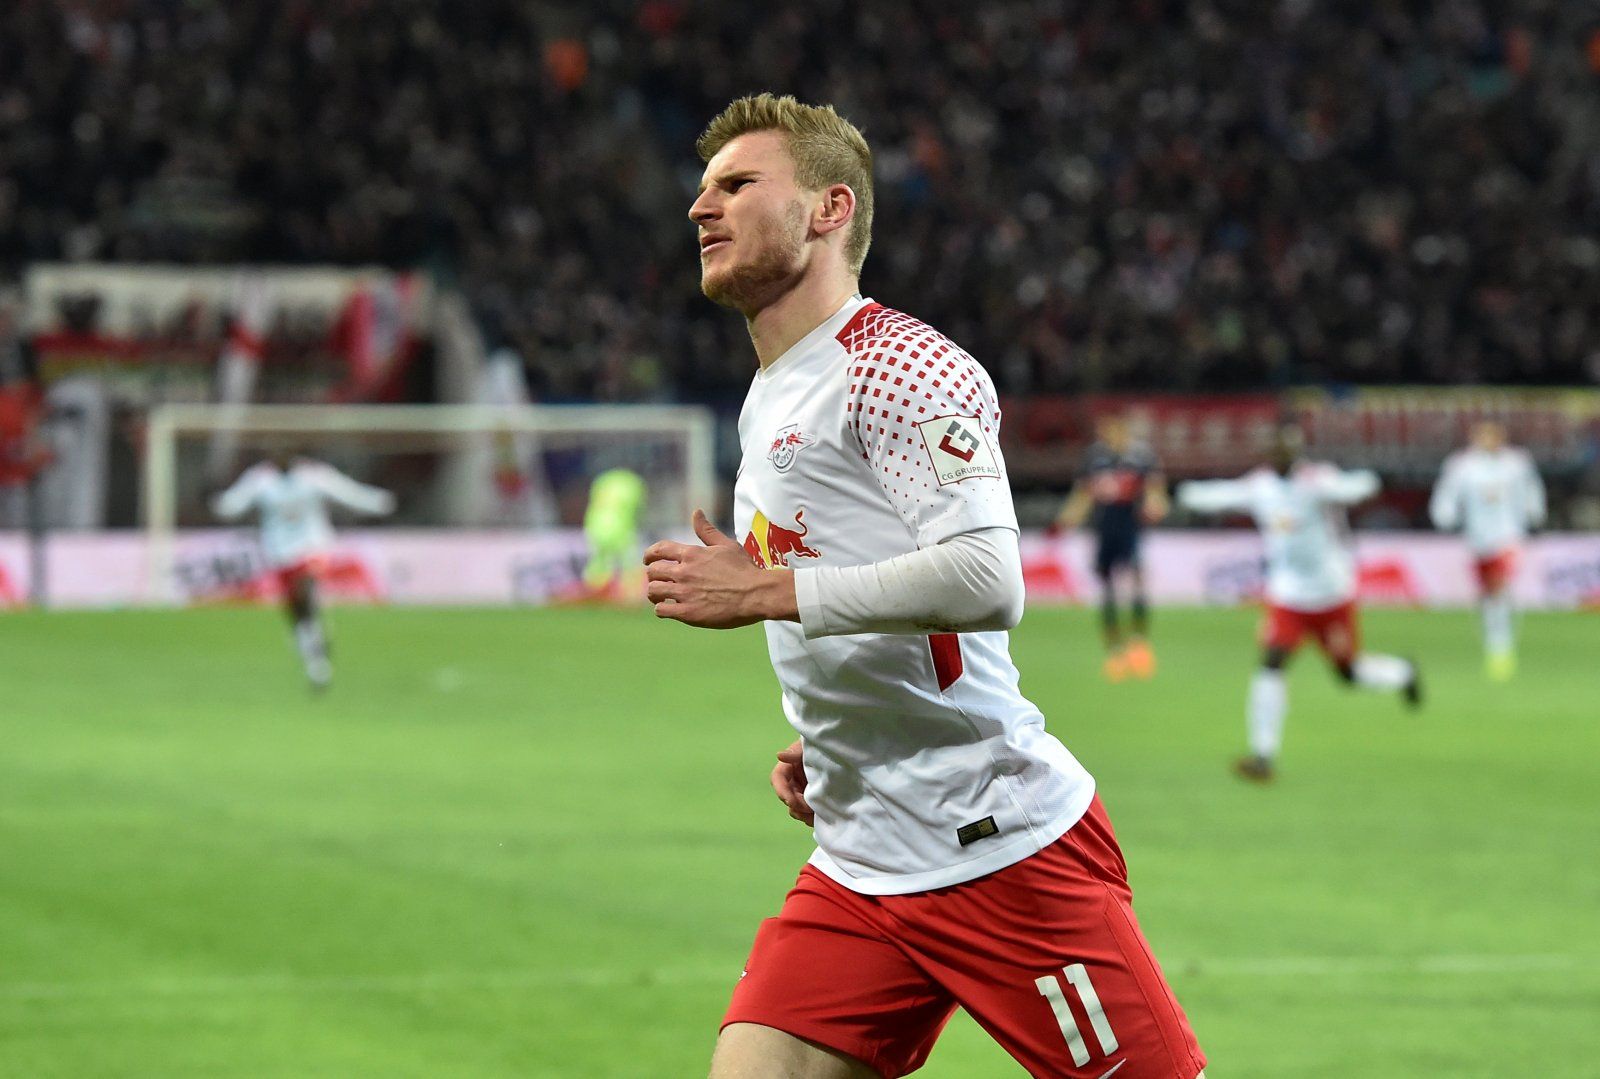 Timo Werner playing for RB Leipzig